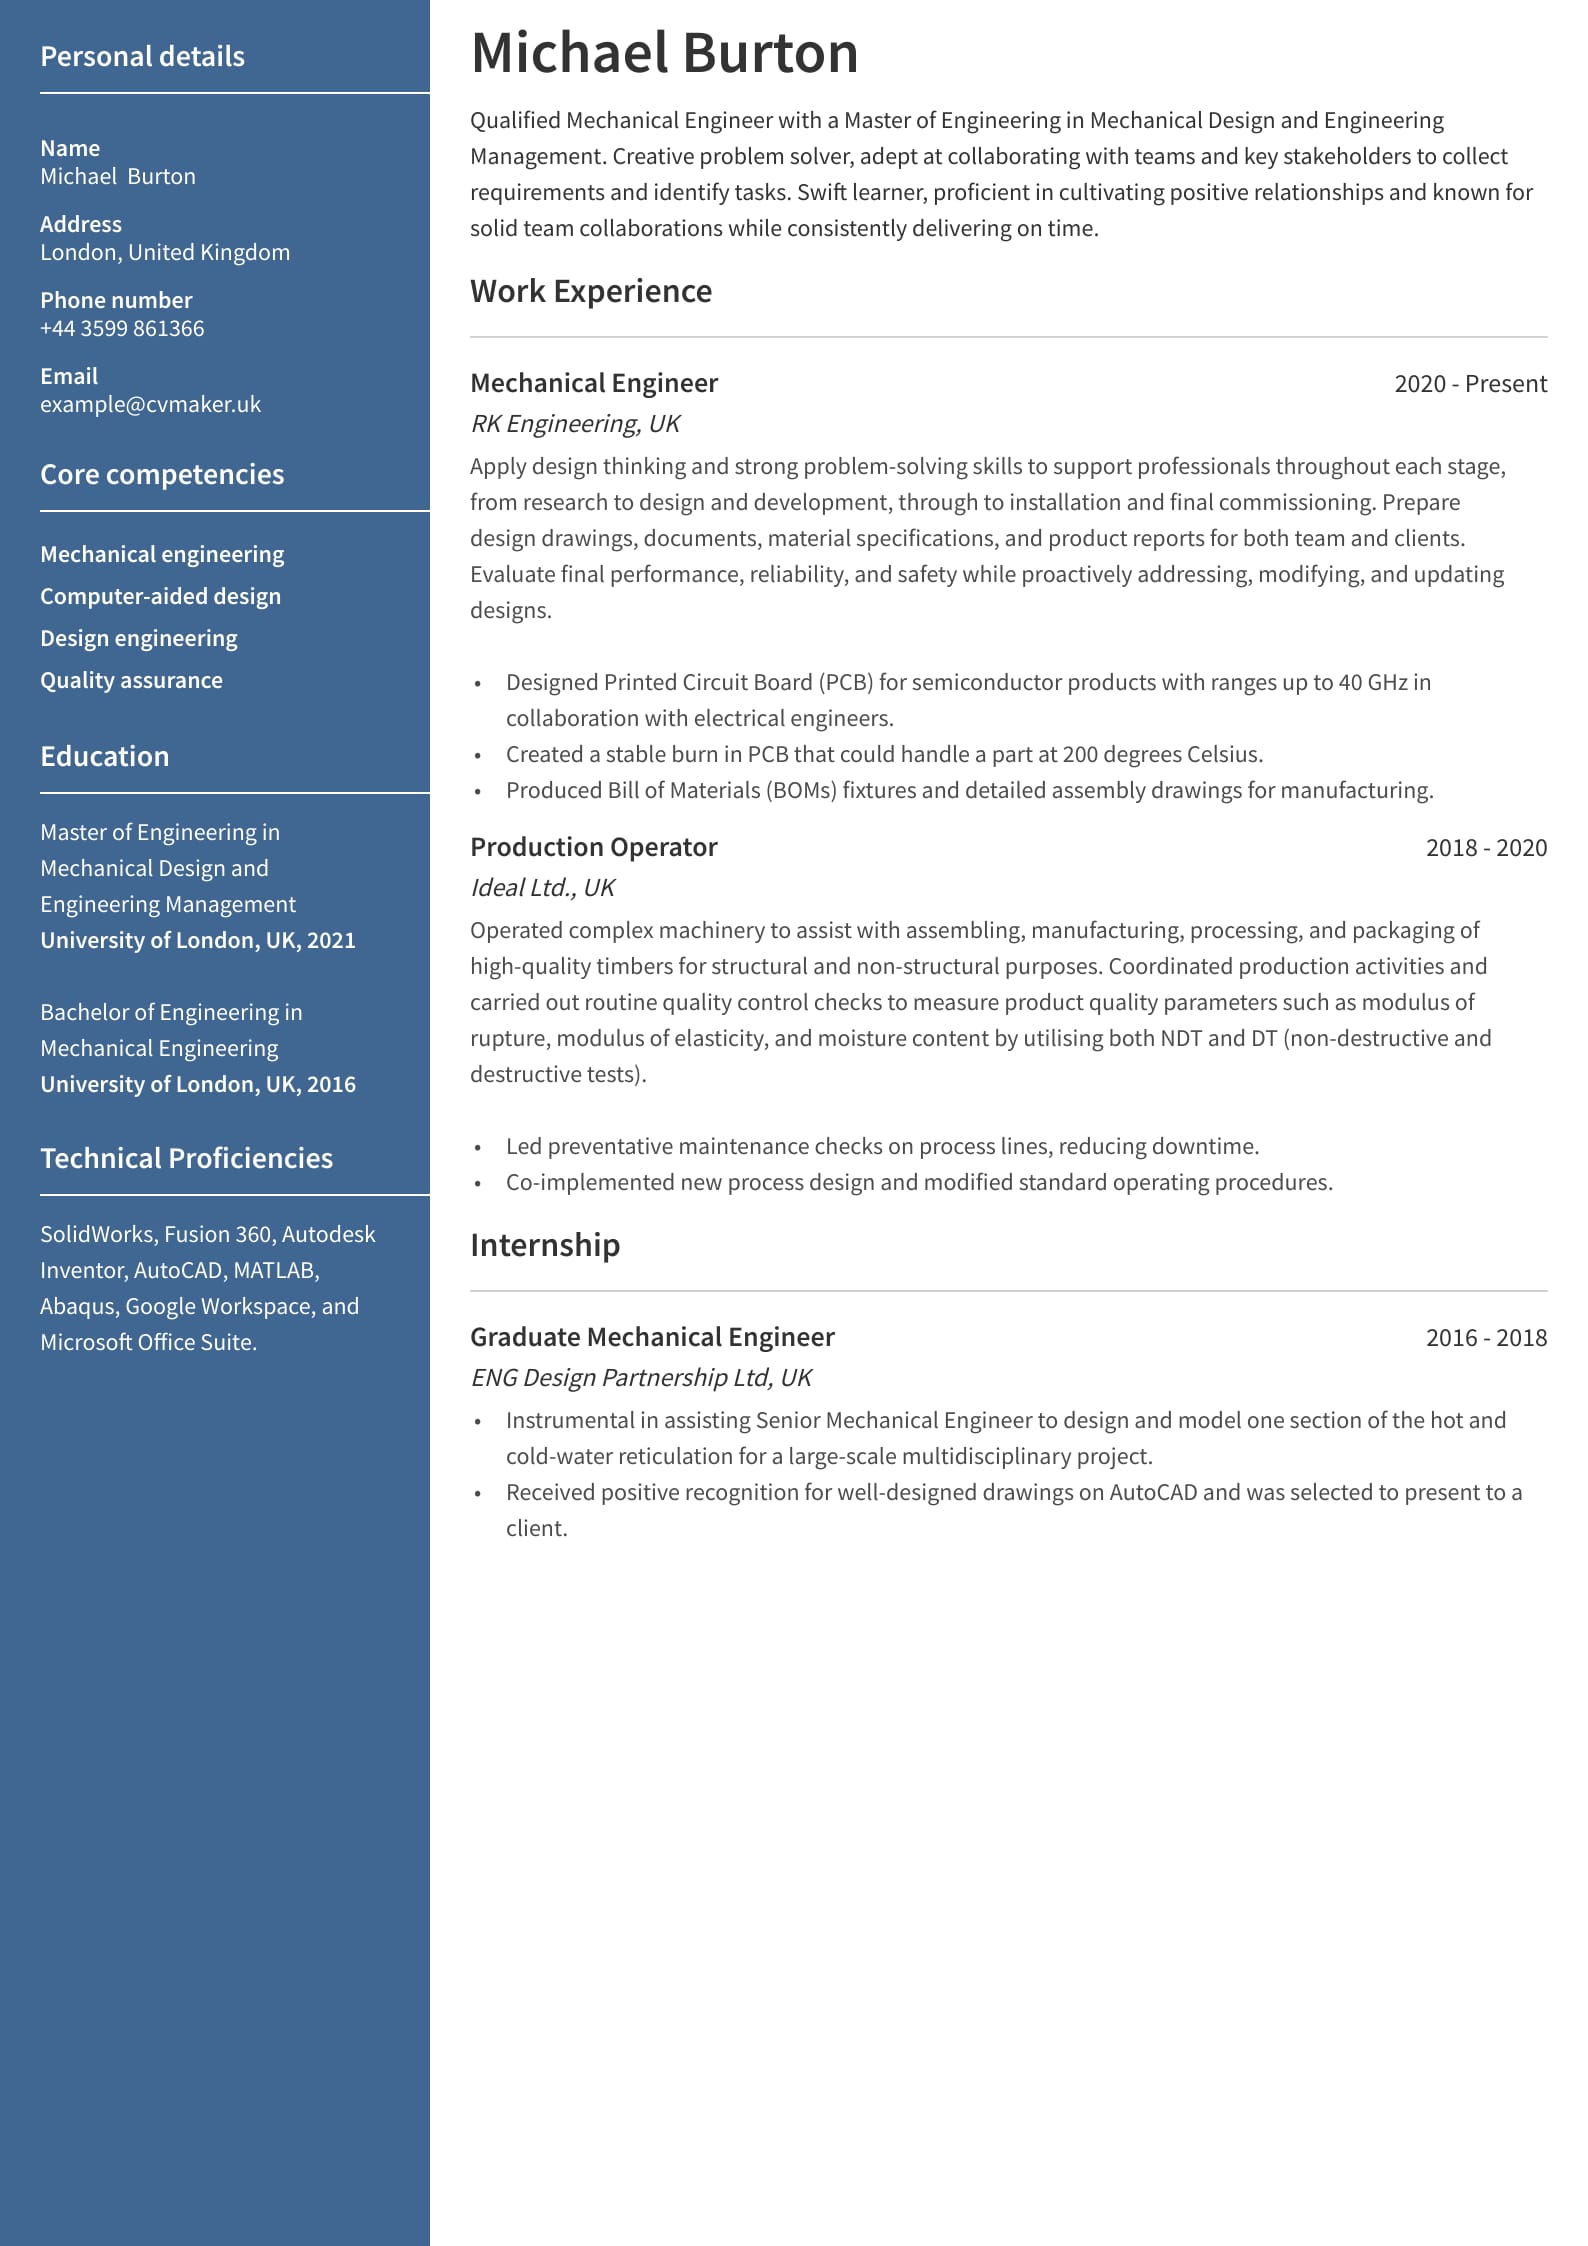 CV example - Engineer - Stanford template